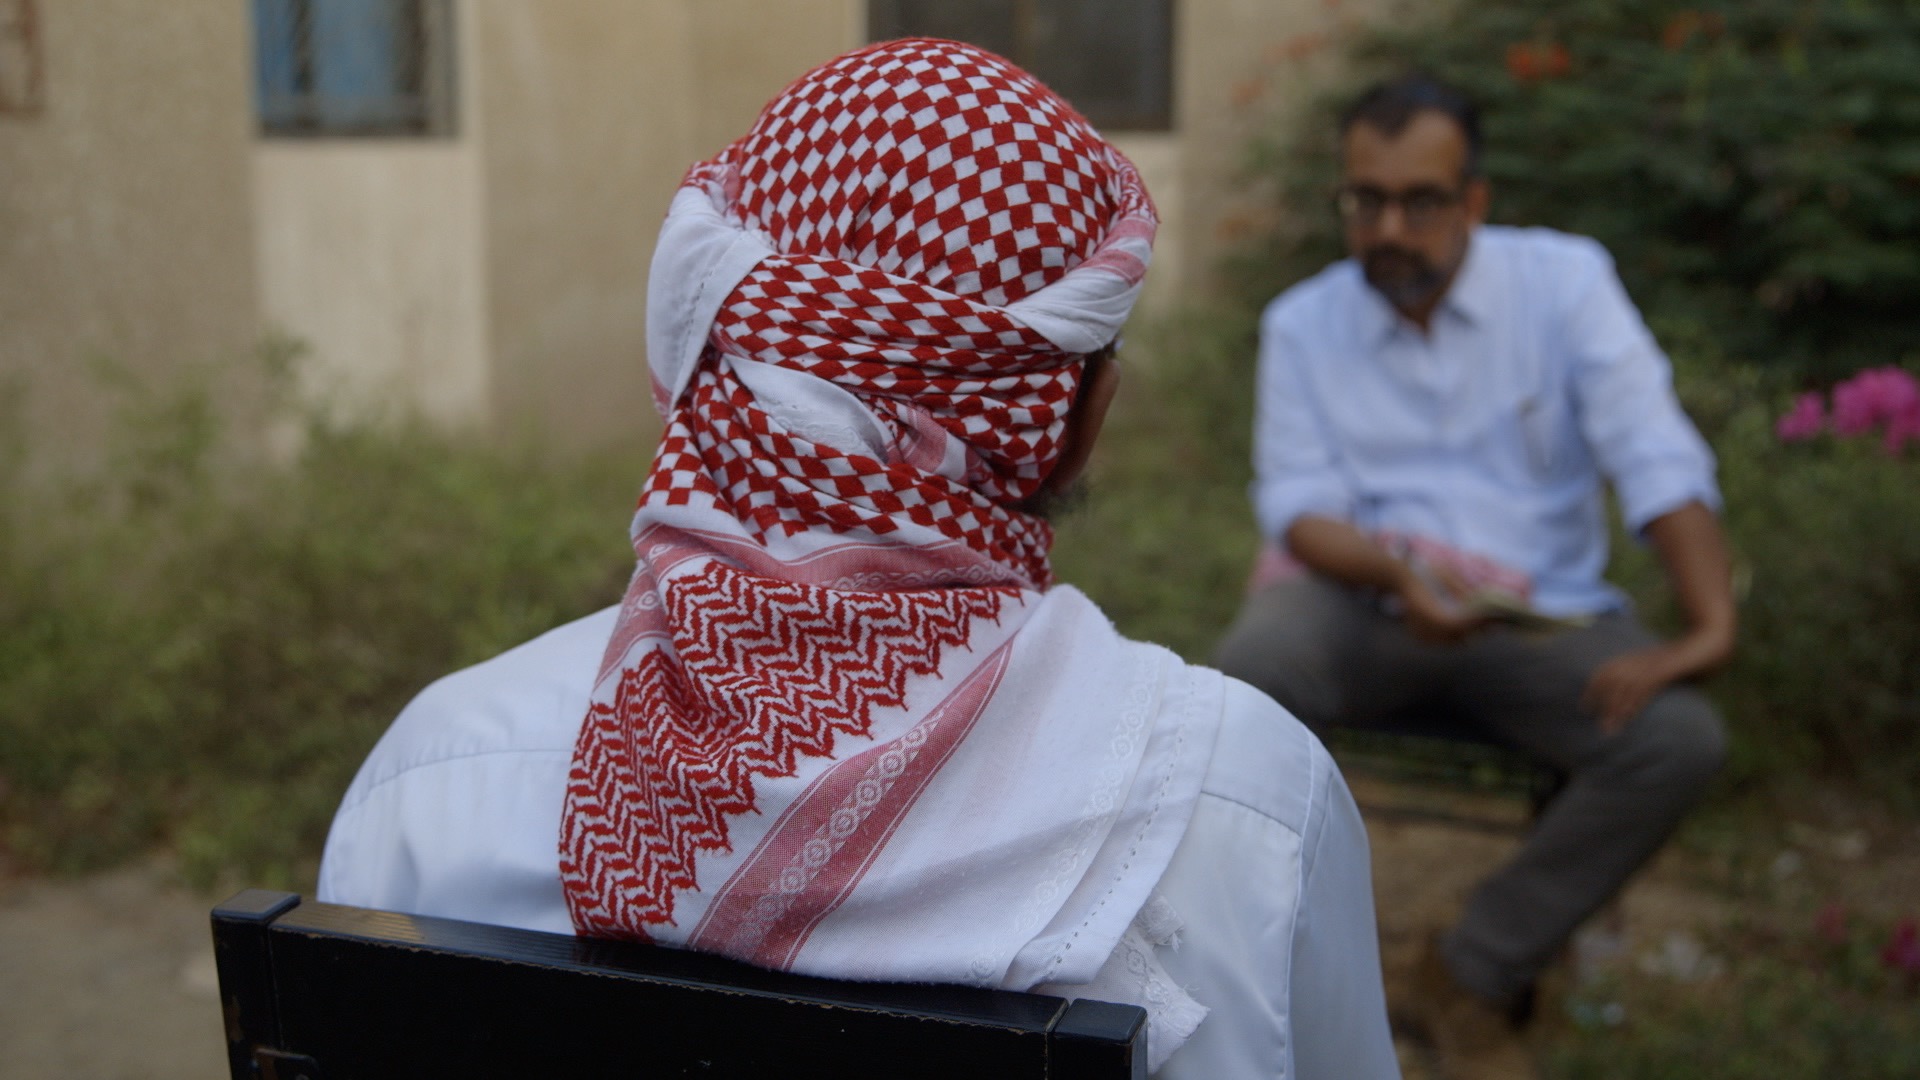 A prominent al Qaeda leader grants an interview on the condition his identity is concealed.